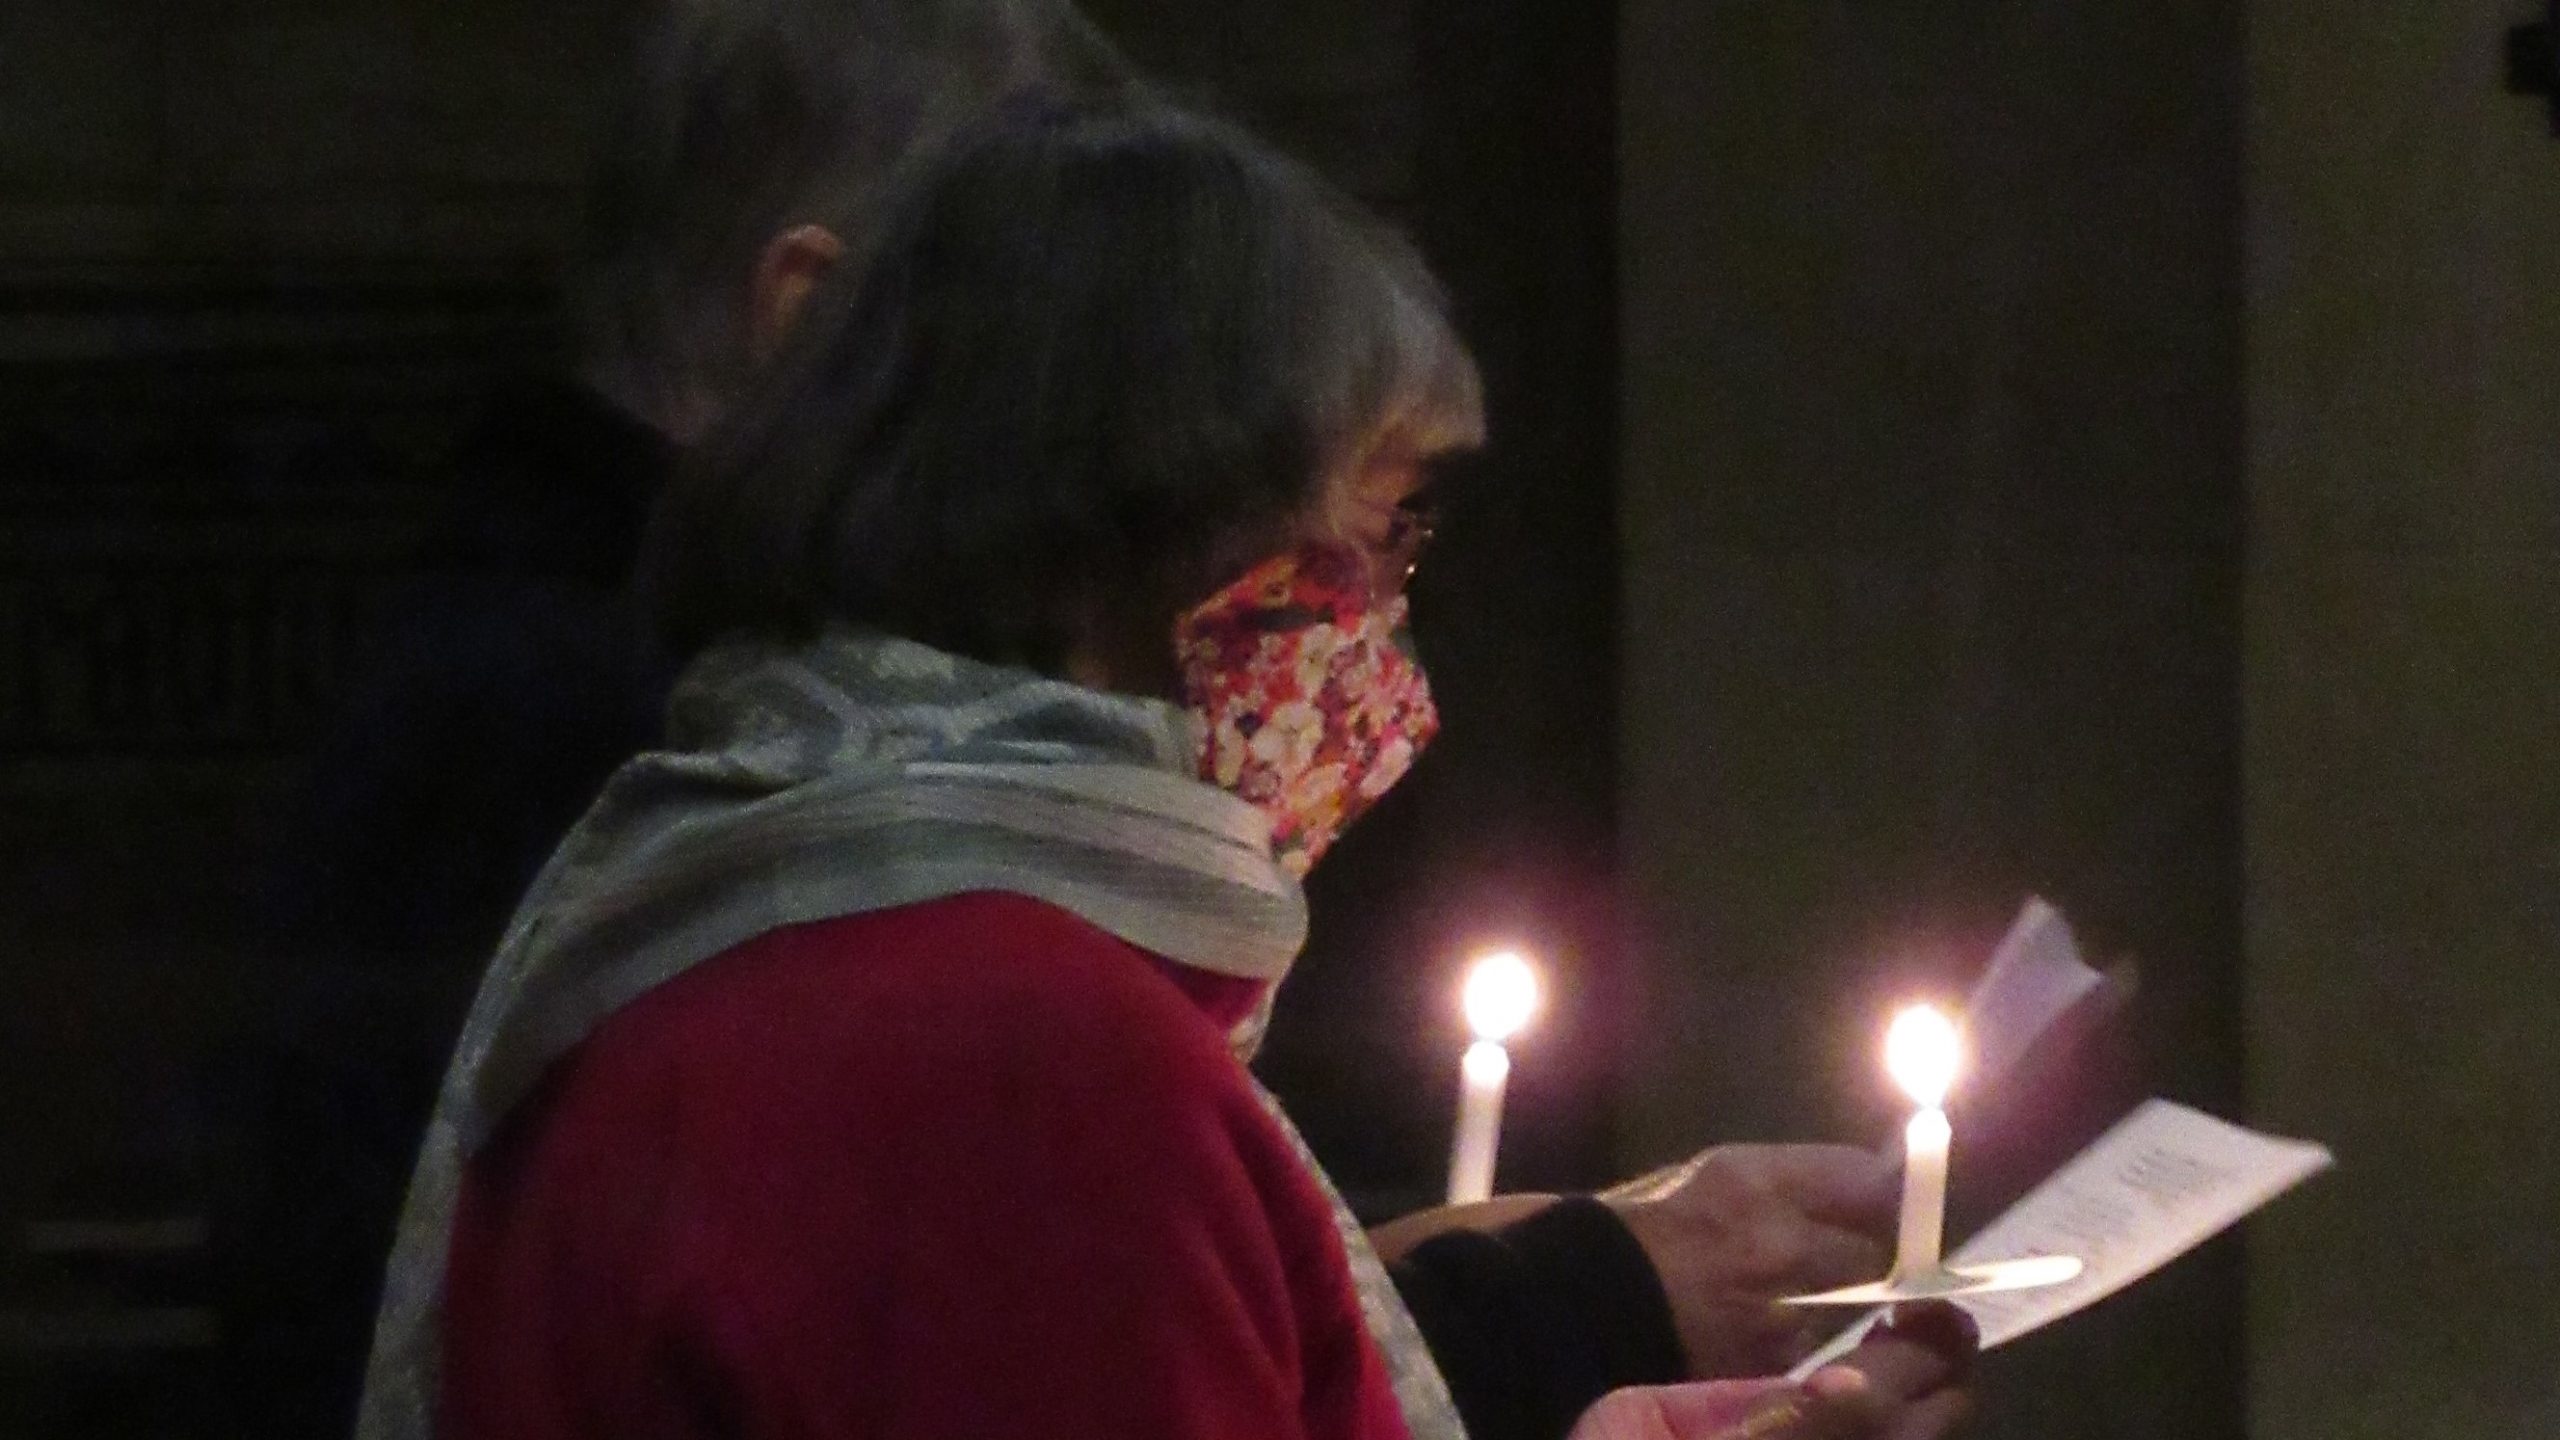 An attendee of our candlelit carol service